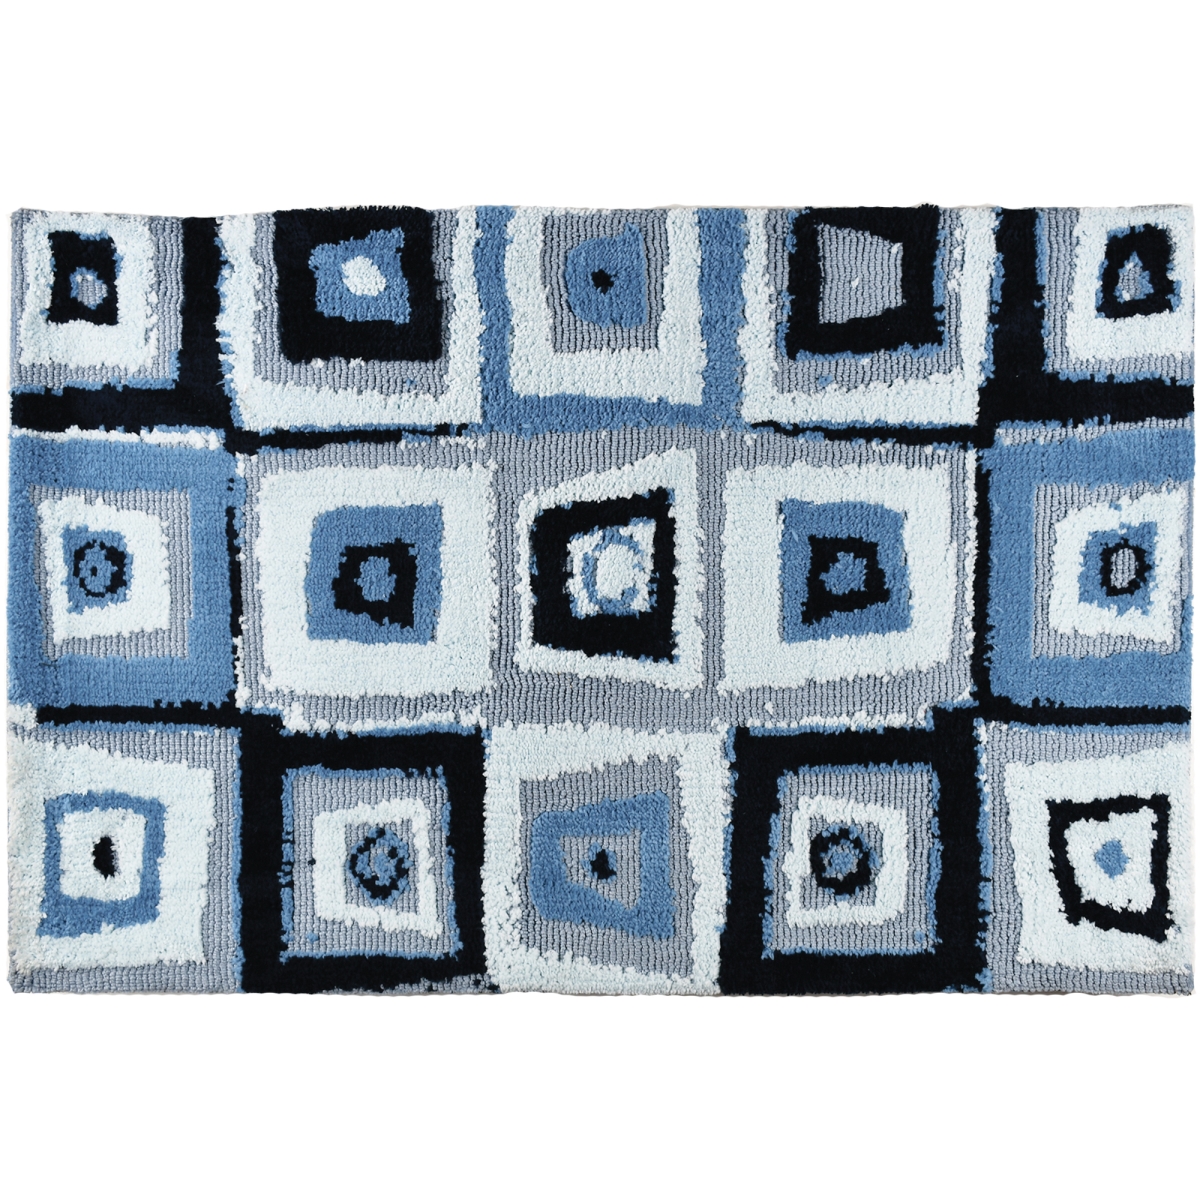 Ss-mc001b 21 X 33 In. Mid Century Blues Accent Rug